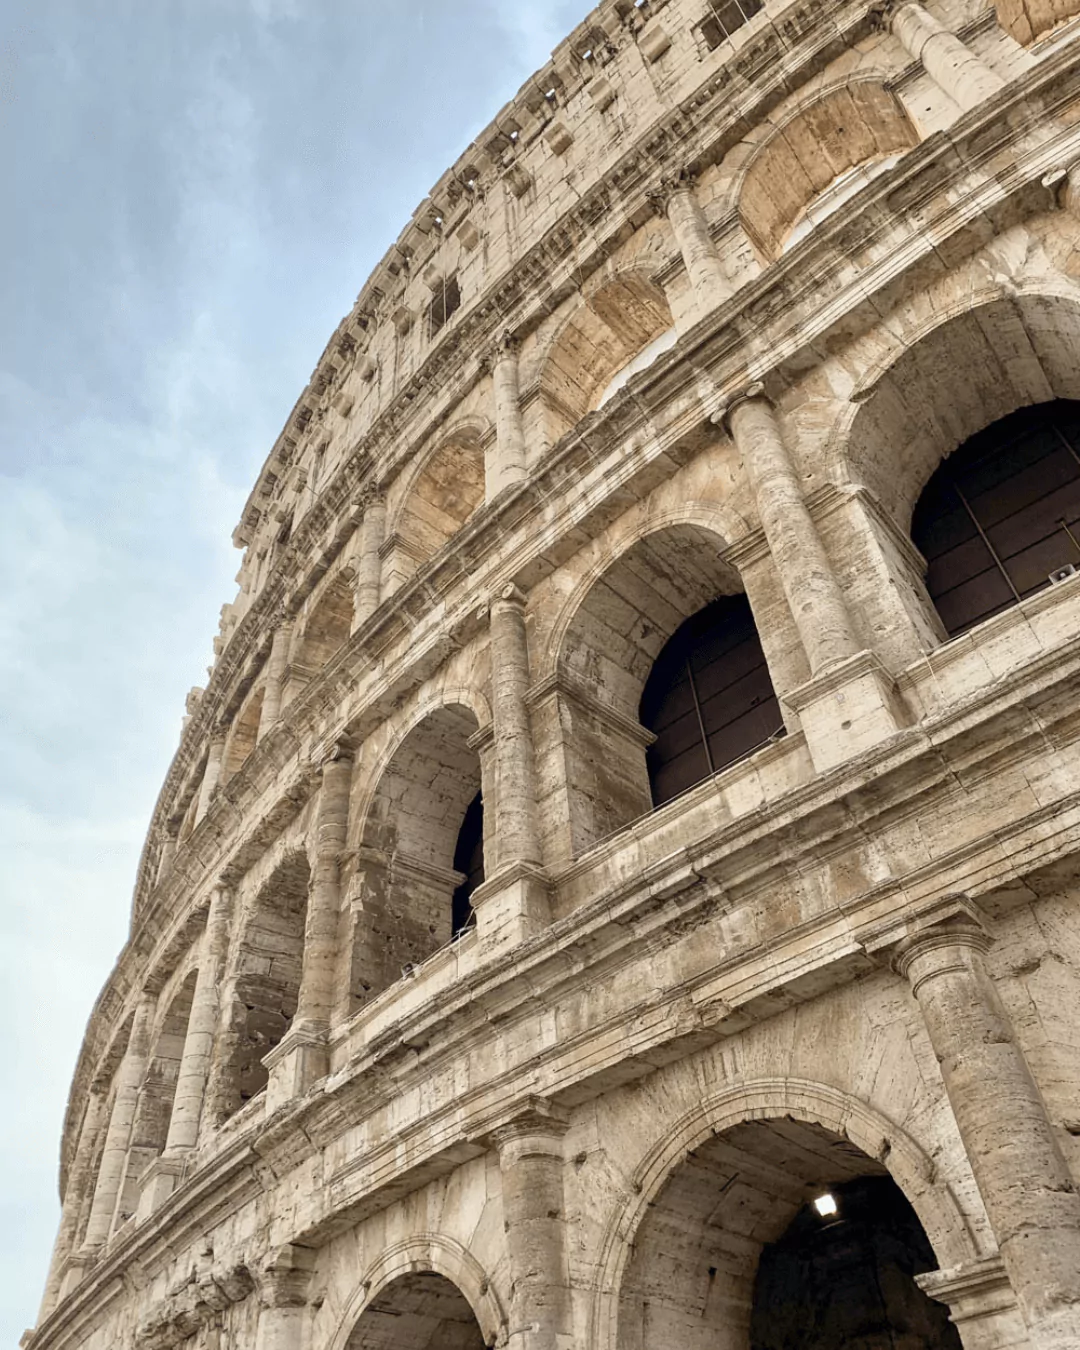 Exploring the Wonders of UNESCO World Heritage Sites - the Colosseum